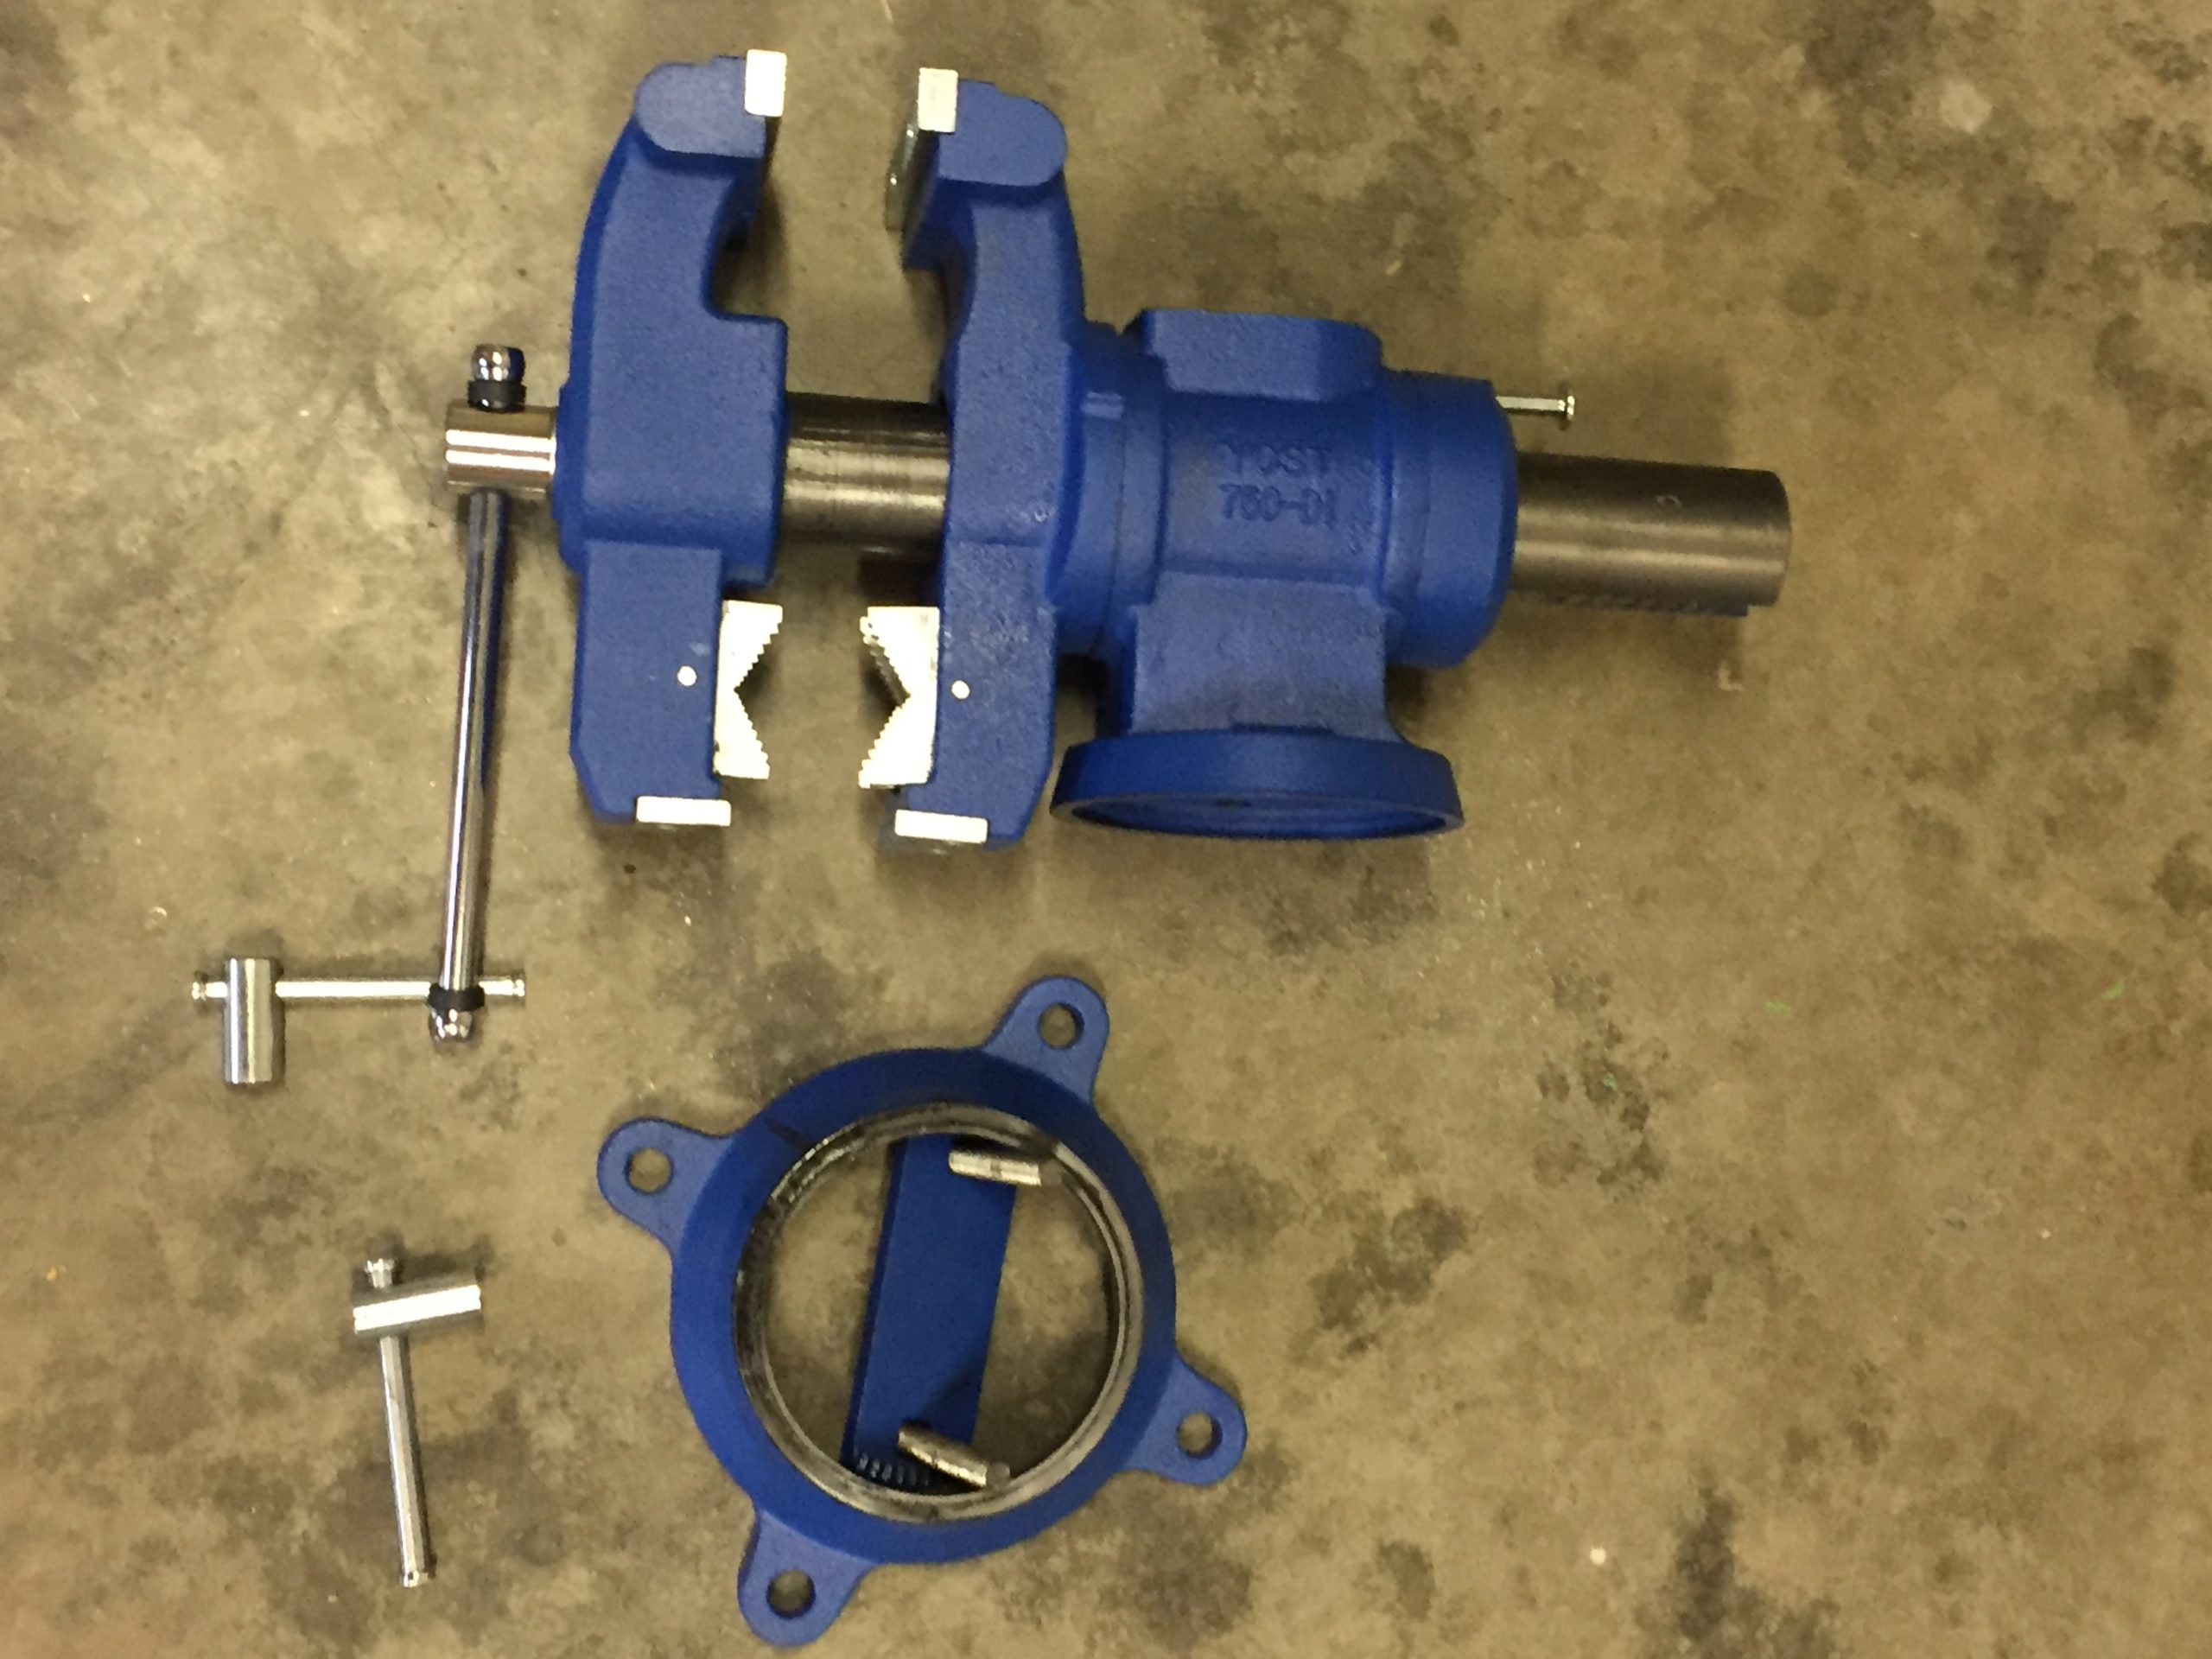 an image showing a disassembled multi jaw swivel vise on concrete